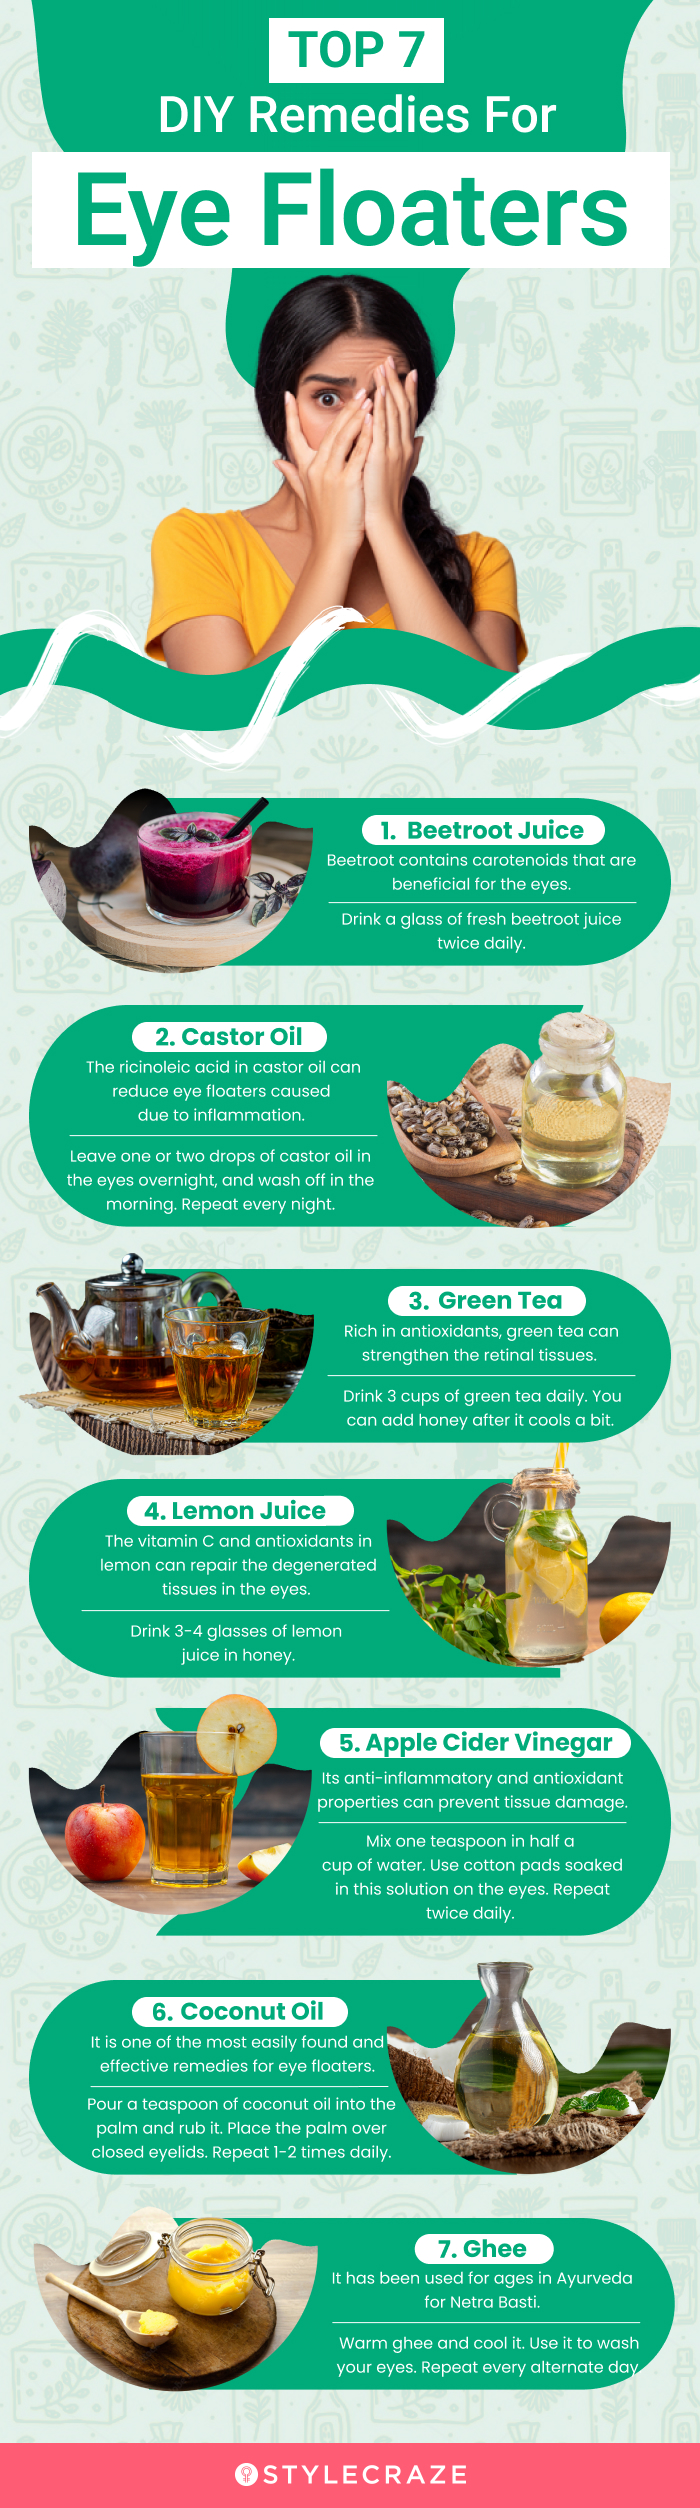 top 7 diy remedies for eye floaters (infographic)